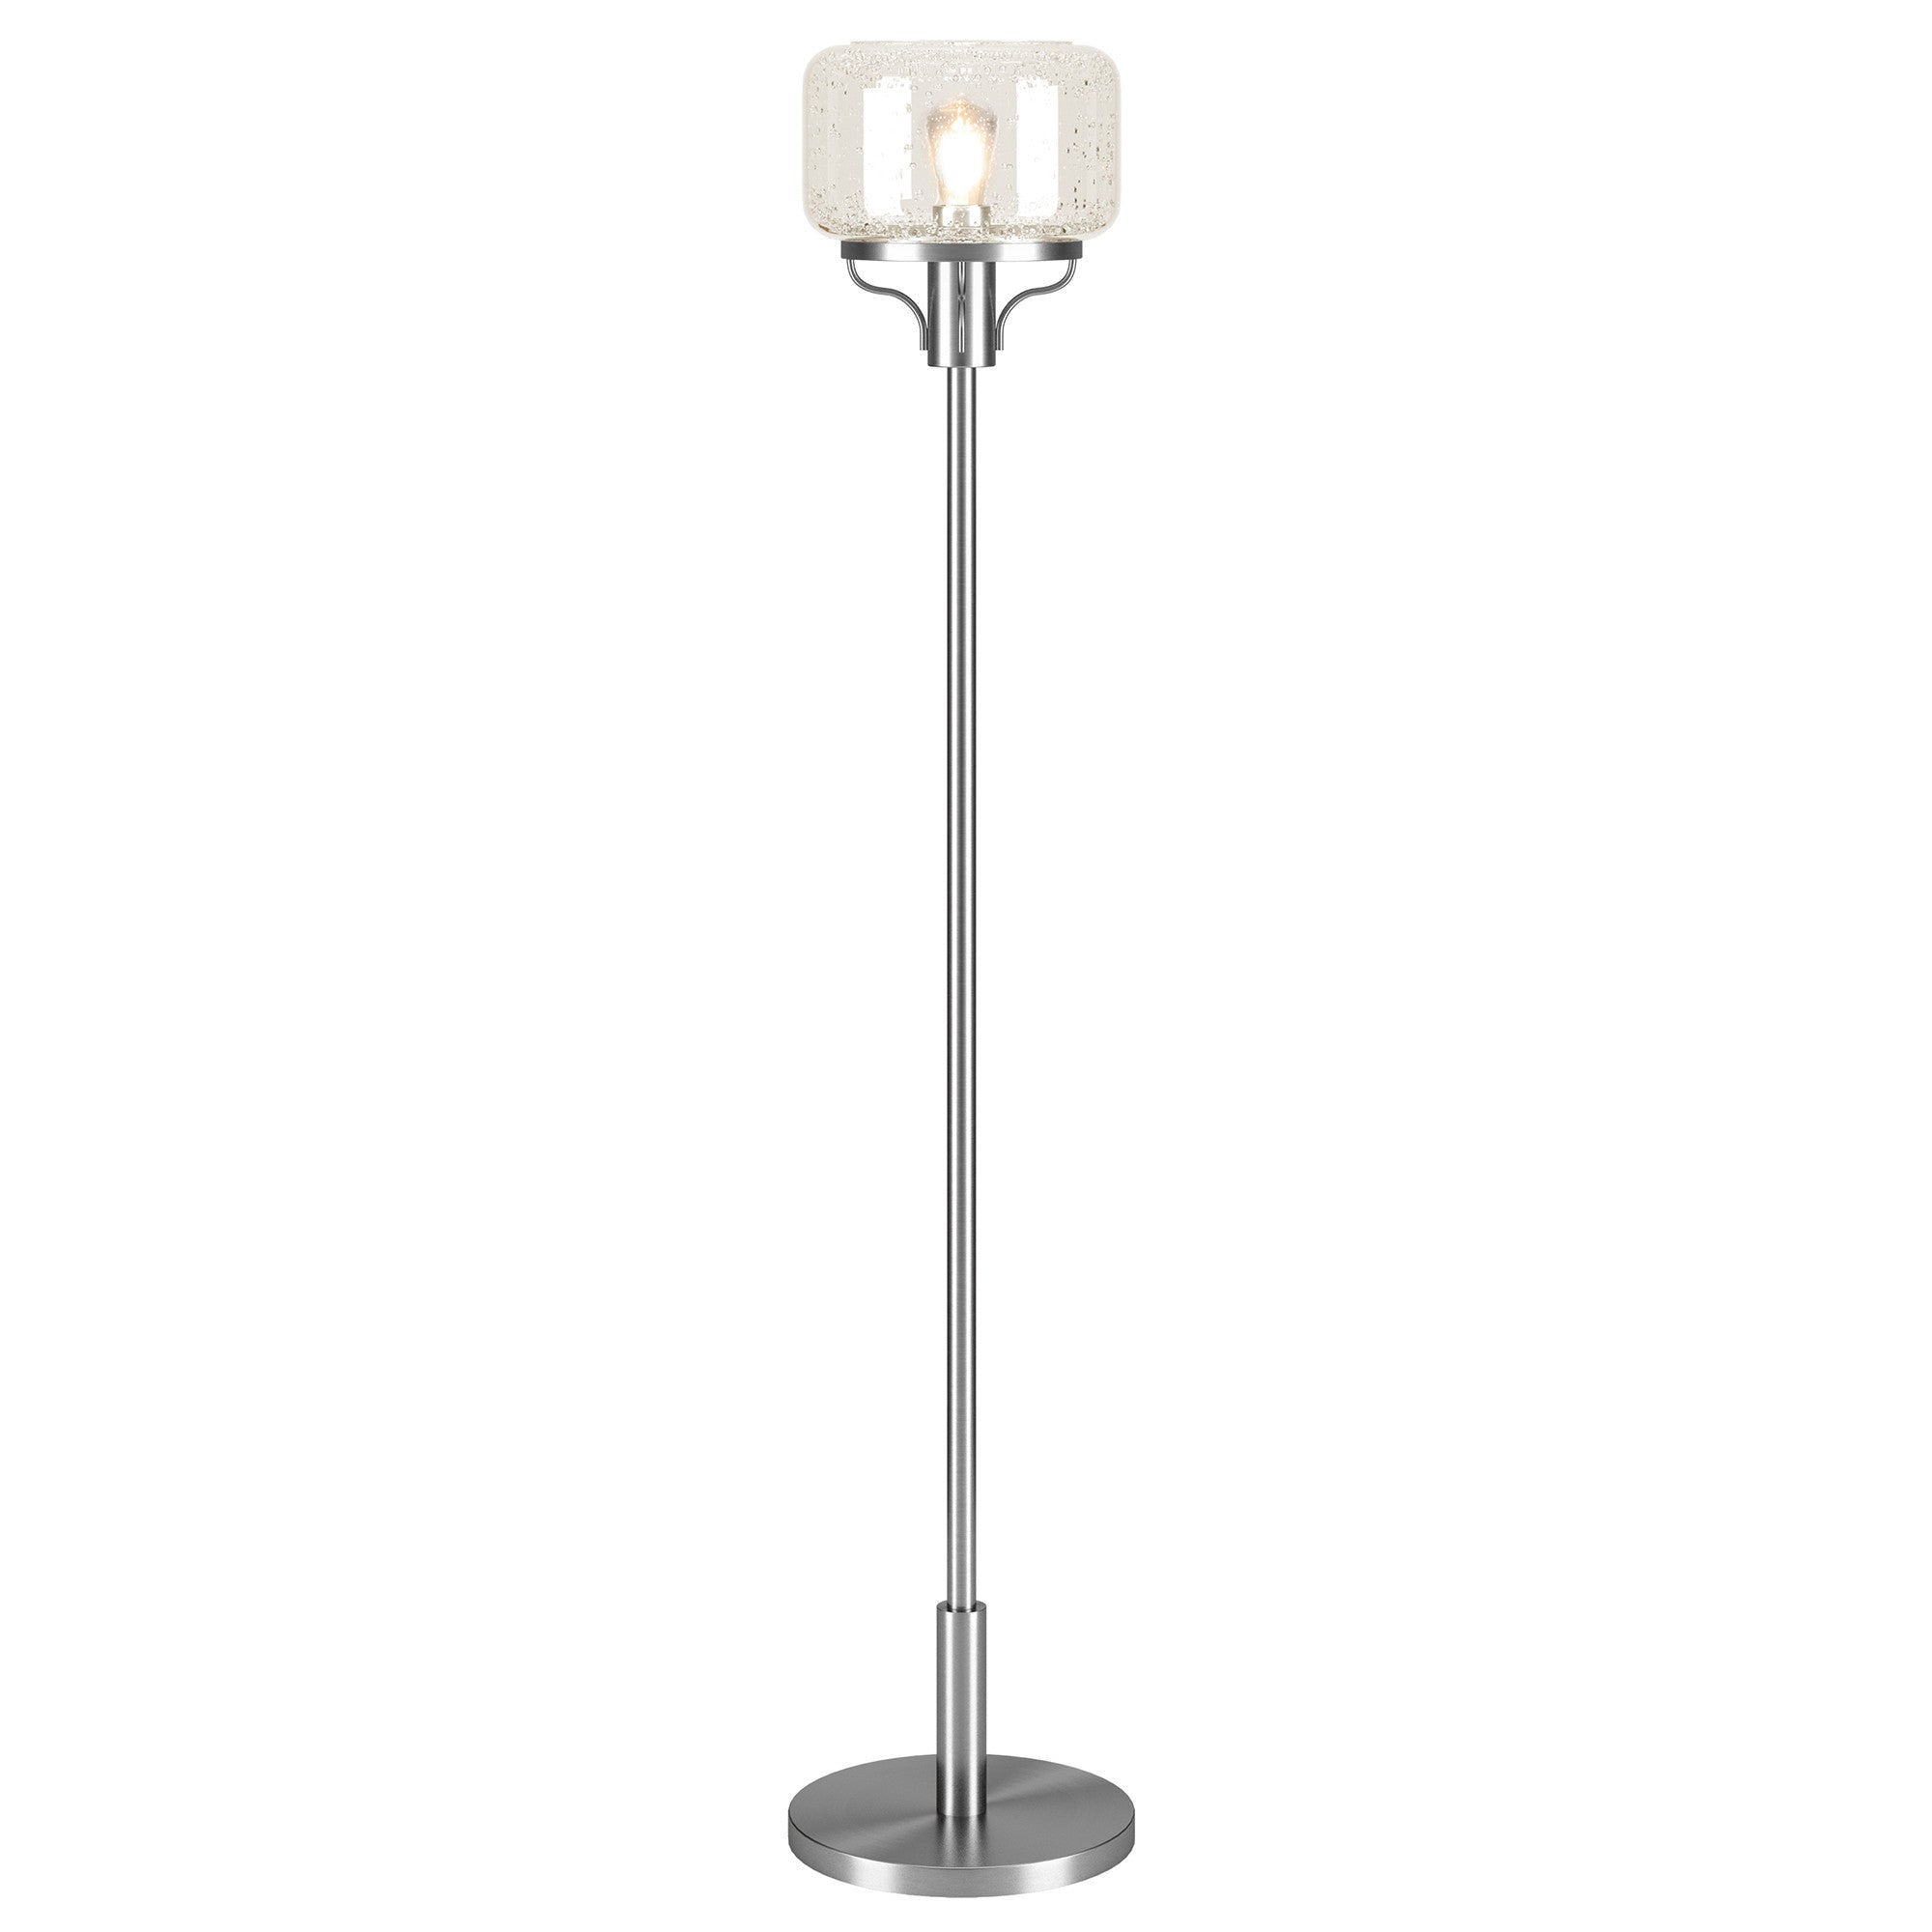 62" Nickel Novelty Floor Lamp With Clear Seeded Glass Globe Shade